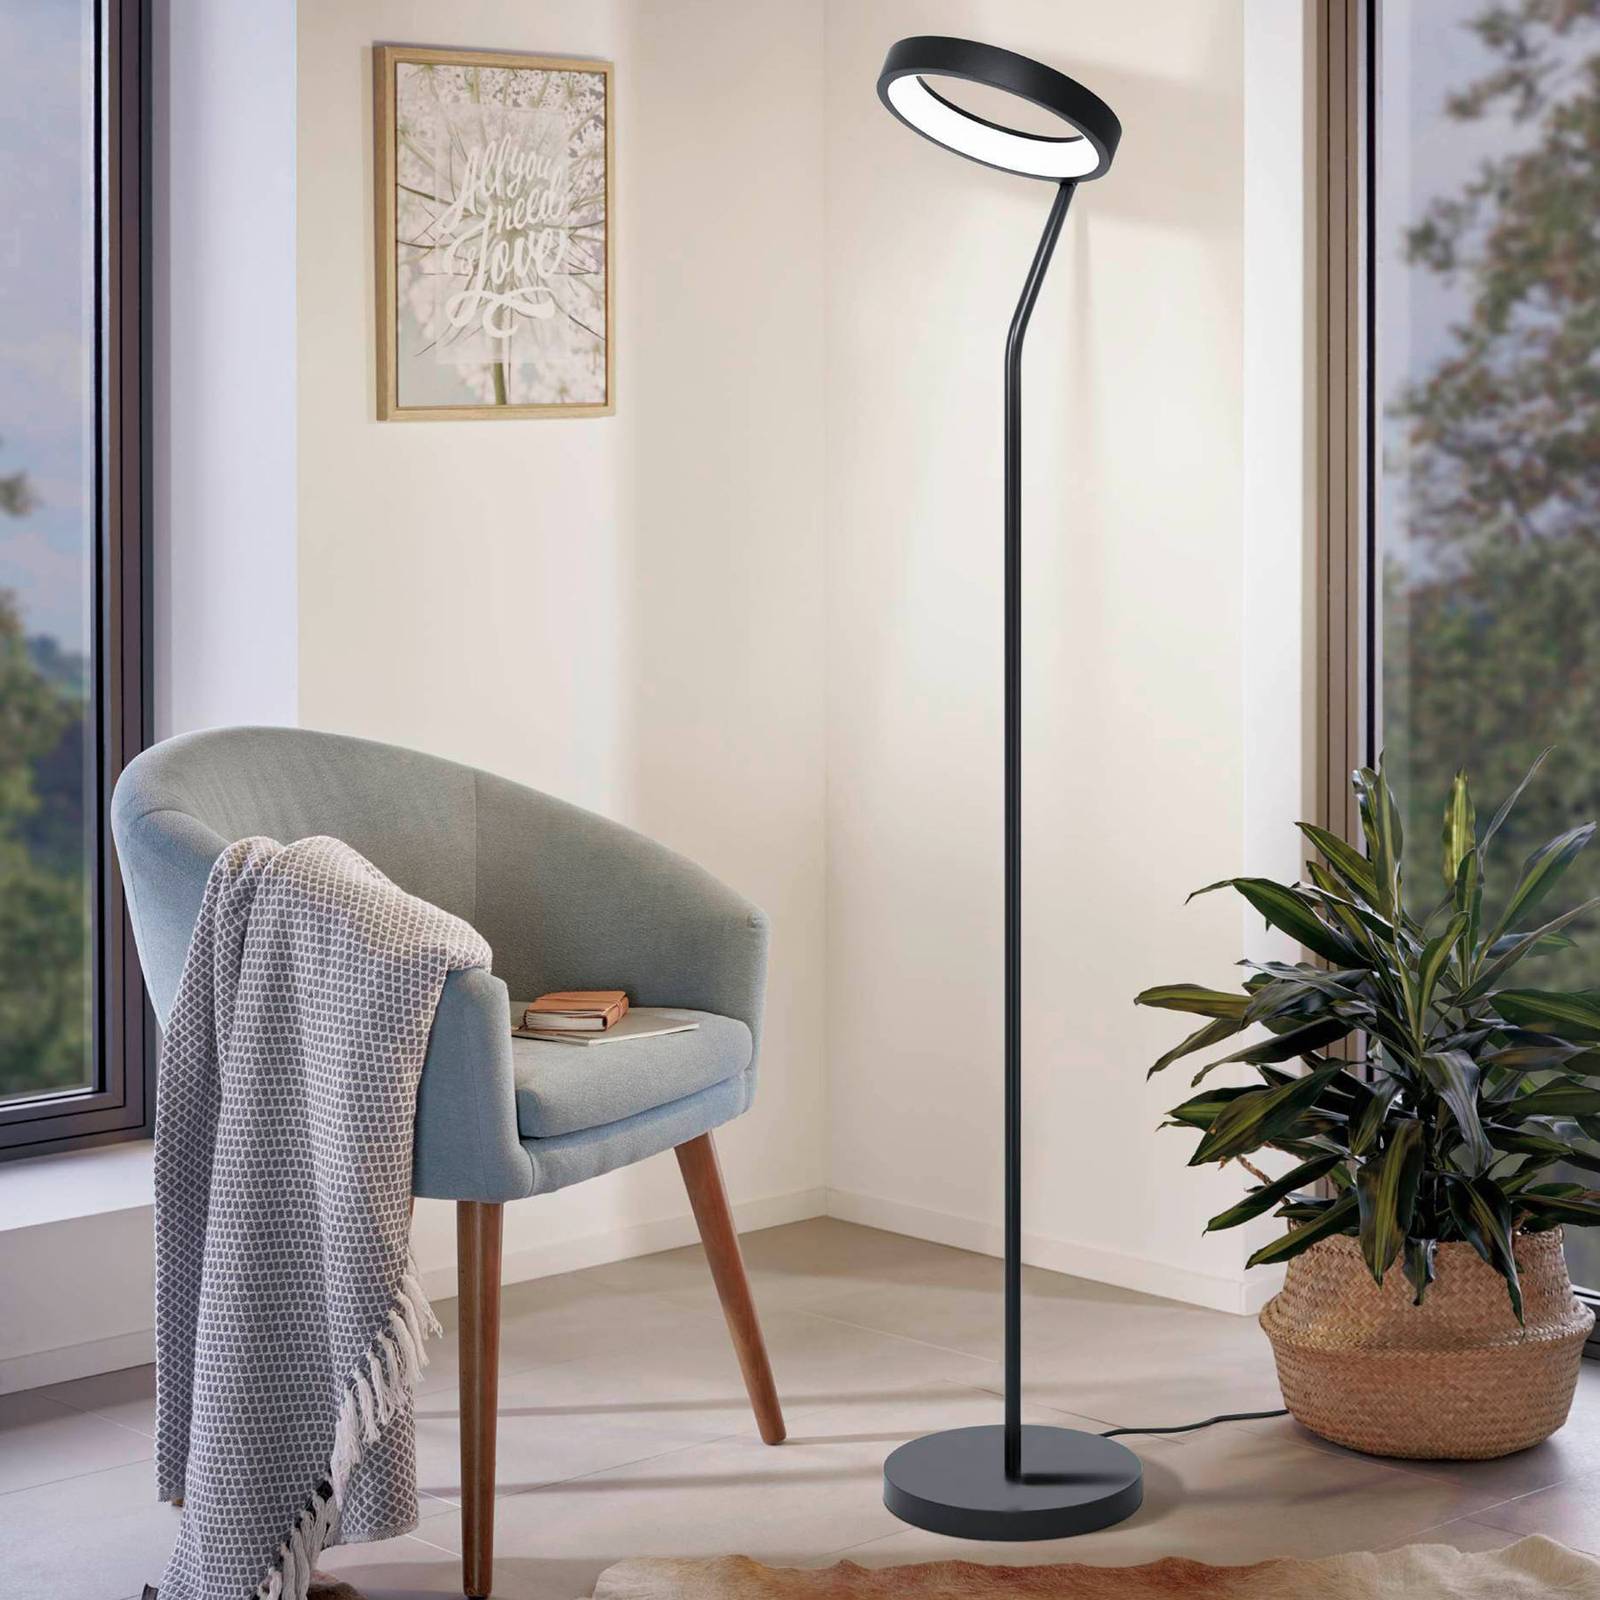 Image of EGLO connect Marghera-C lampadaire LED 9002759990312